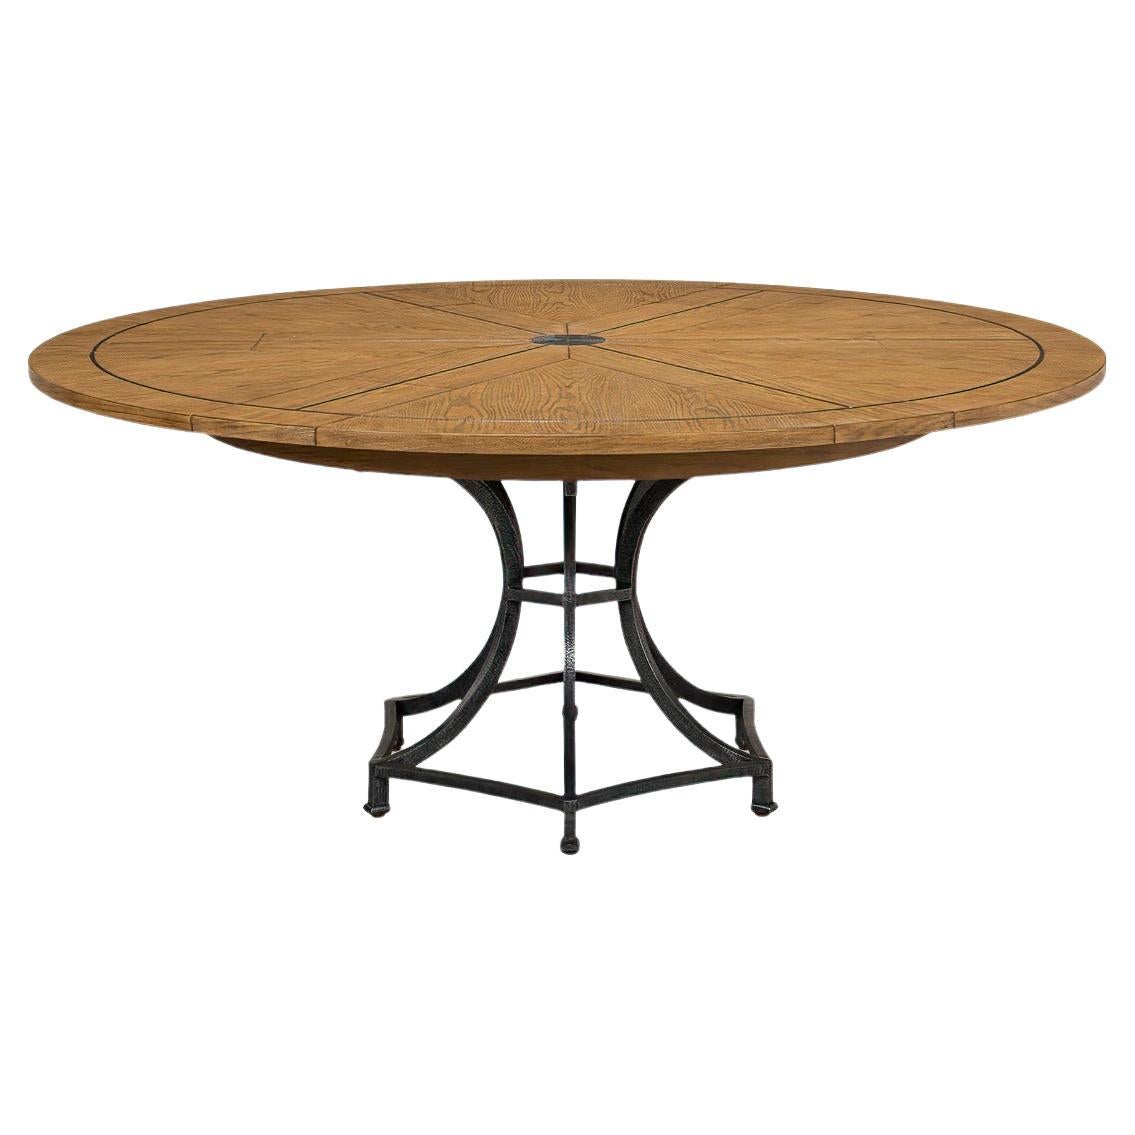 Modern Industrial Round Dining Table - Warm Oak For Sale